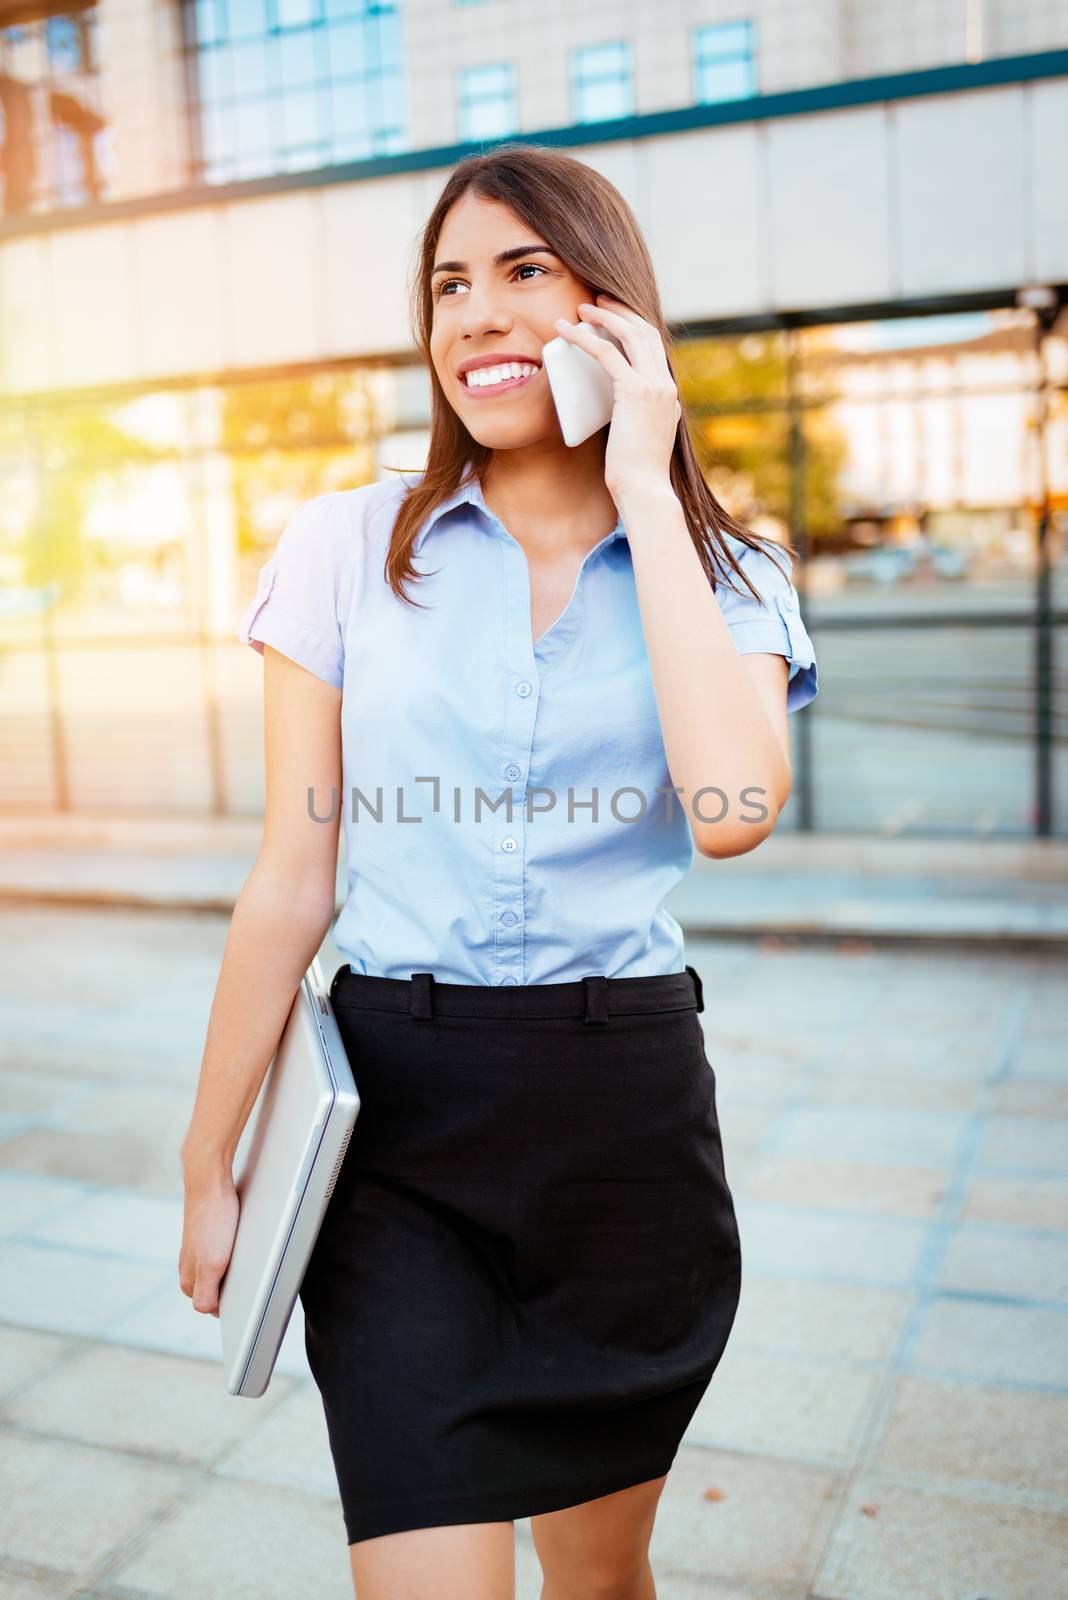 Young smiling businesswoman talking on smartphone in office district.